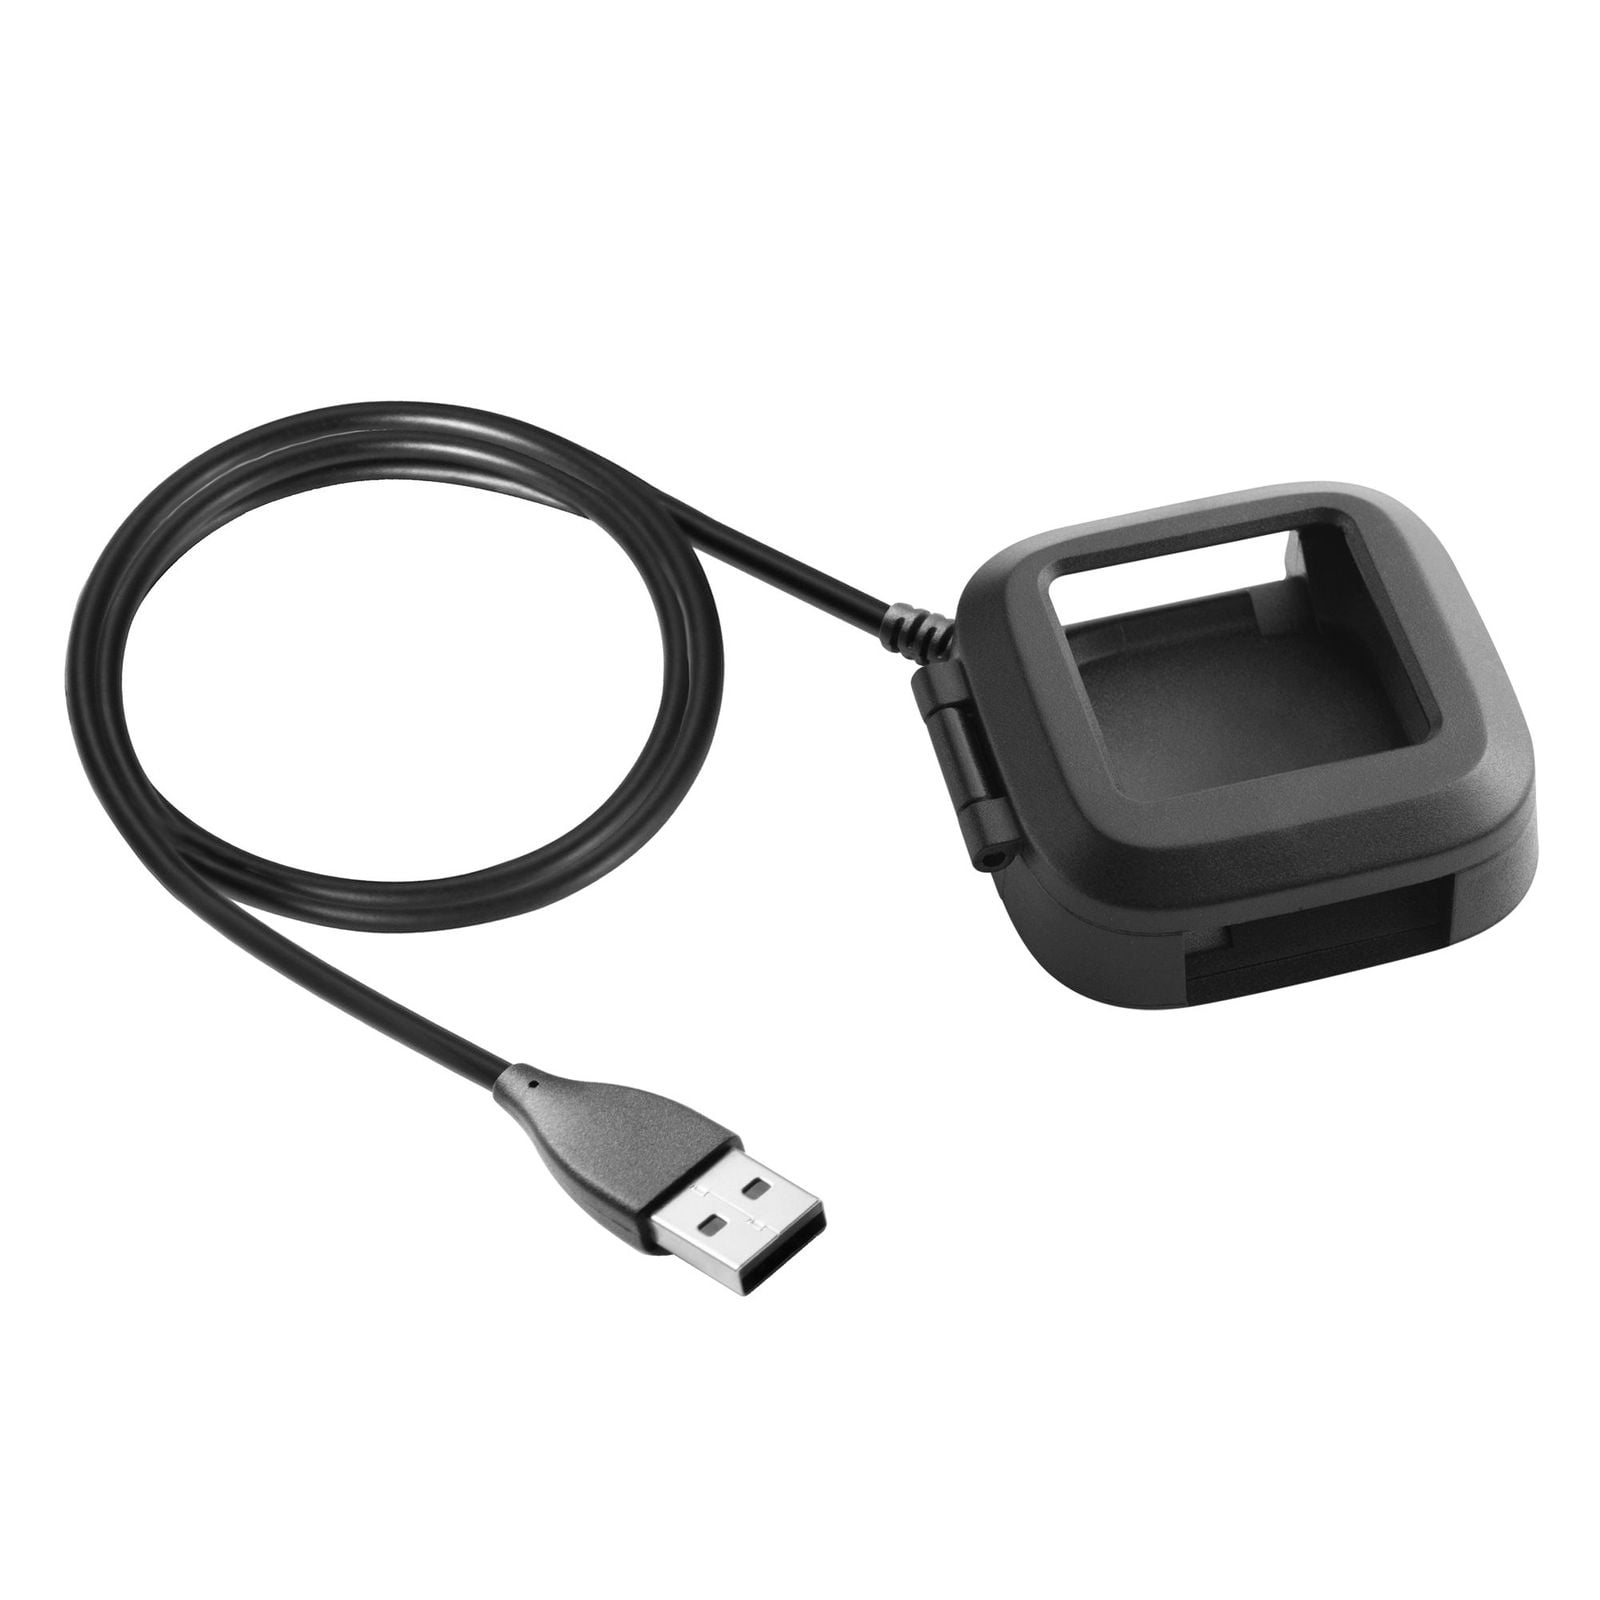 USB Cable Dock Adapter Cradle Charger Holder For Fitbit Versa&Versa 2 Lite 